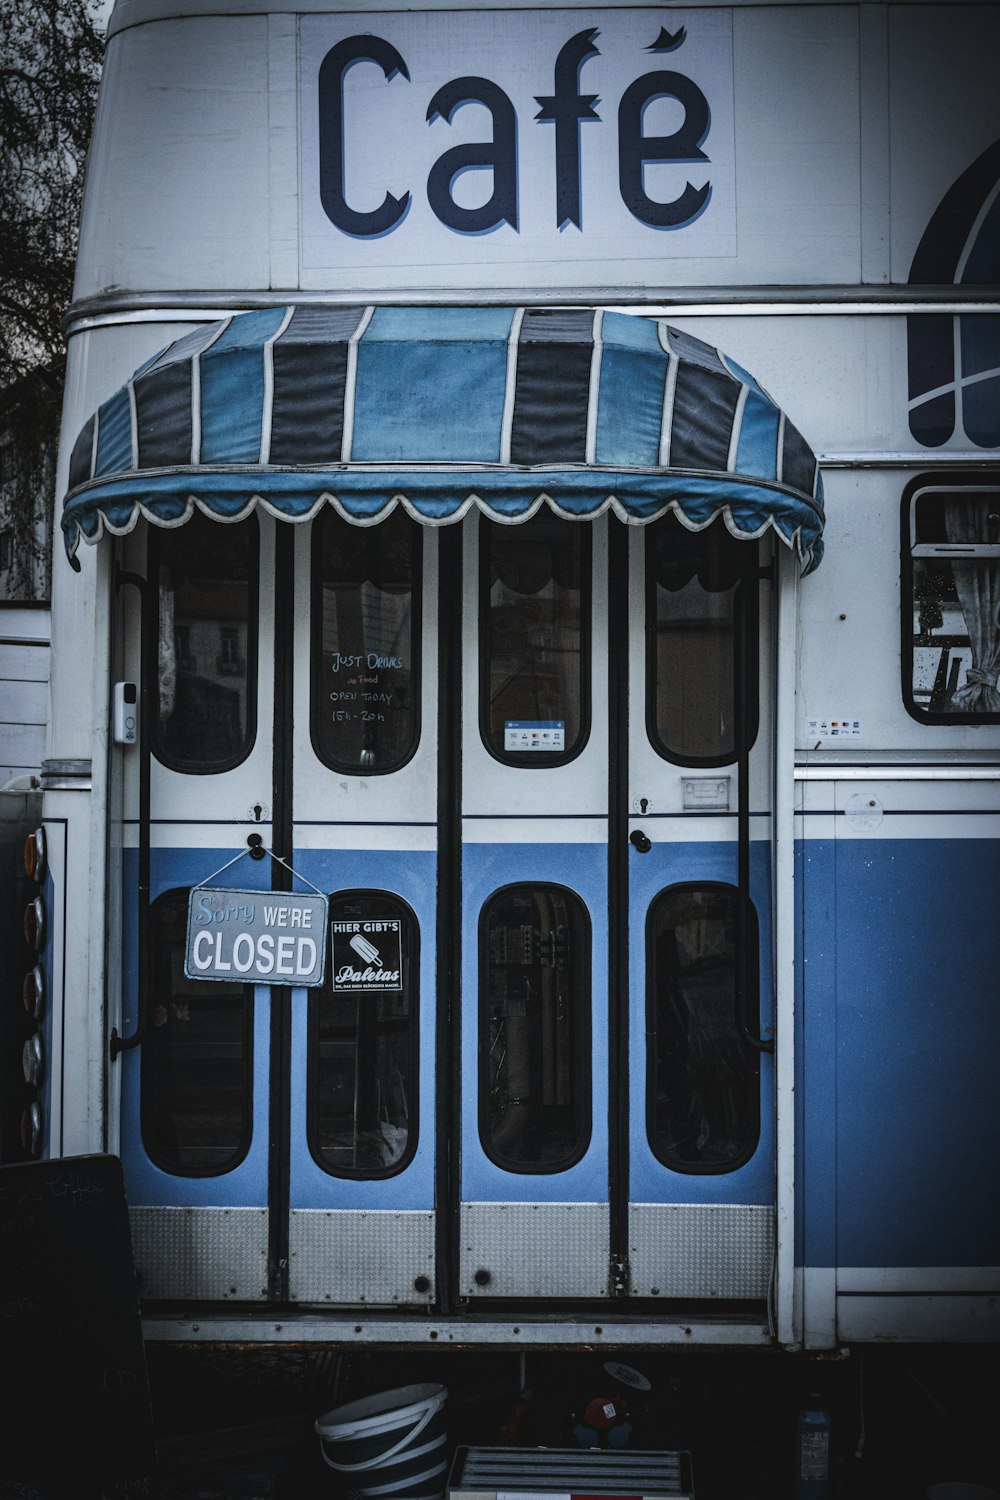 a blue and white bus parked in front of a cafe